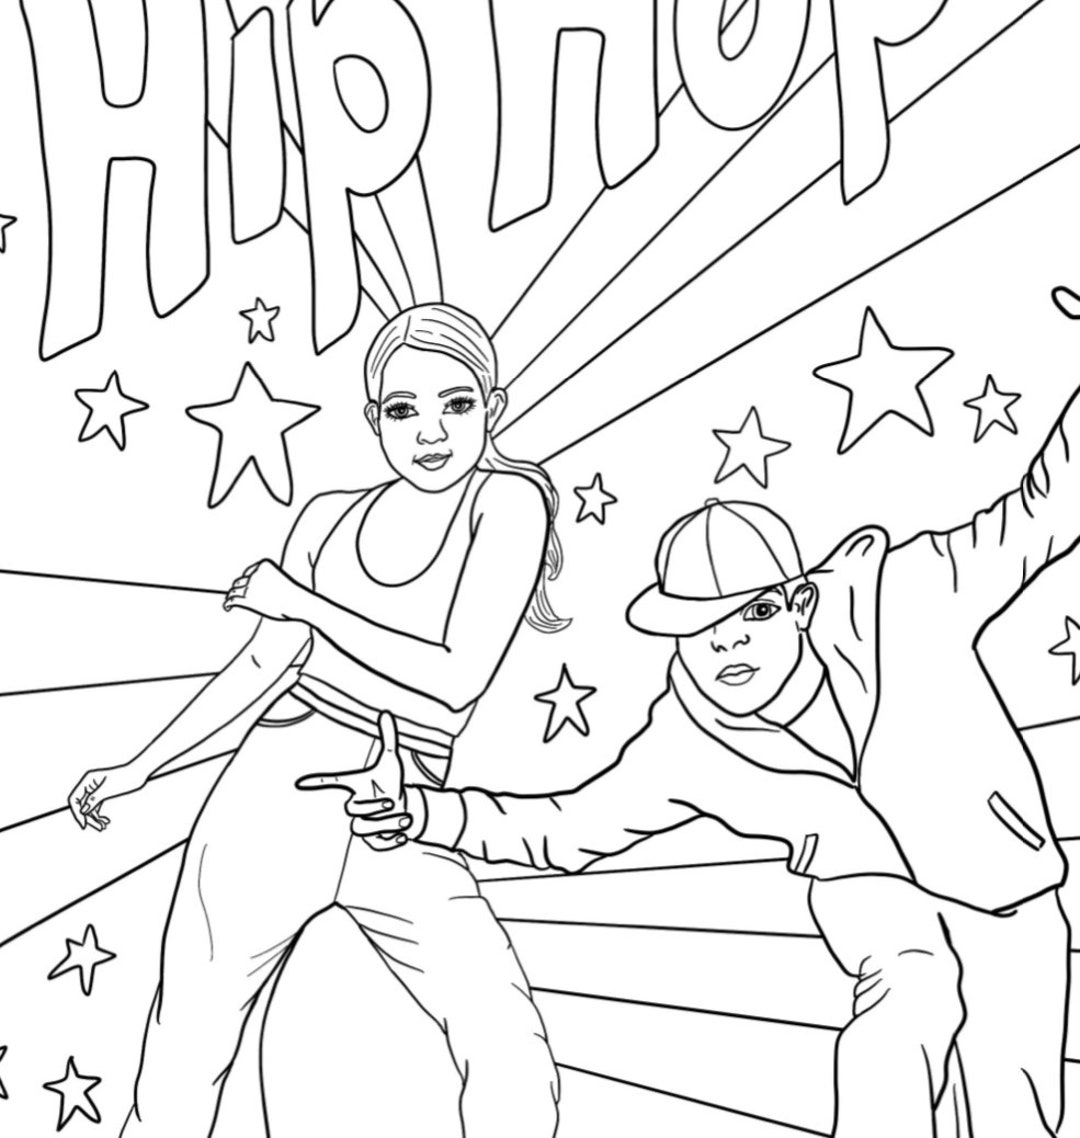 Styles of Dance Coloring Pages - Etsy